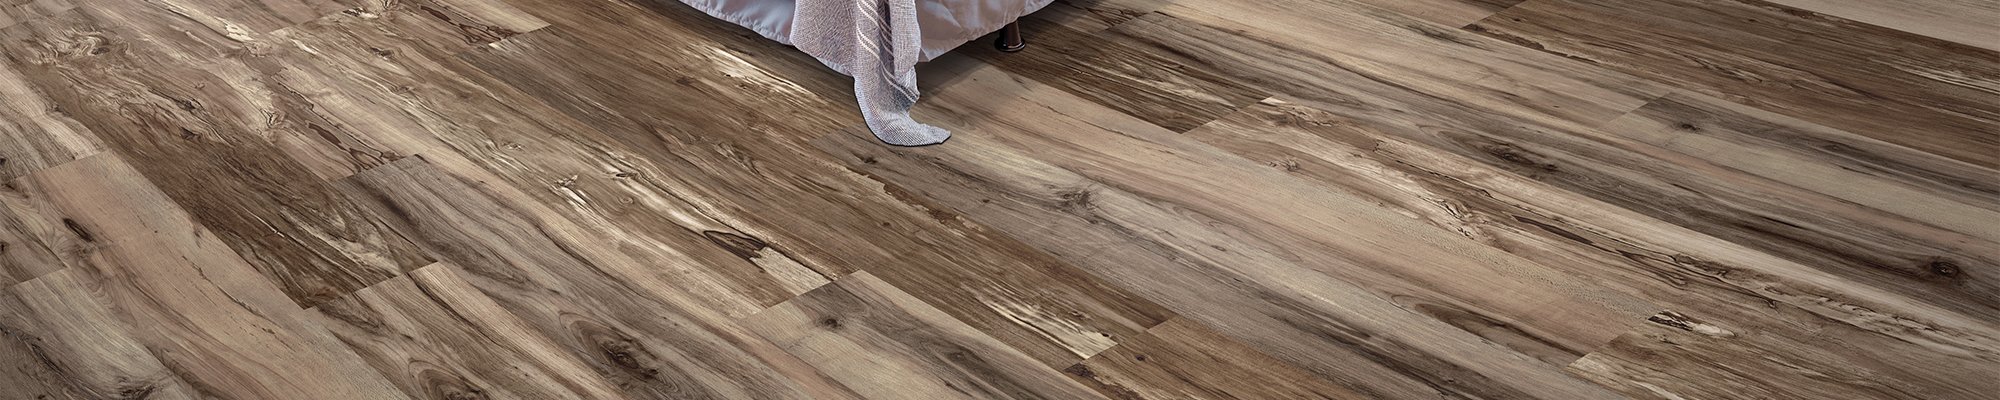 When you choose luxury vinyl flooring, you'll find the material caters to your whole home.